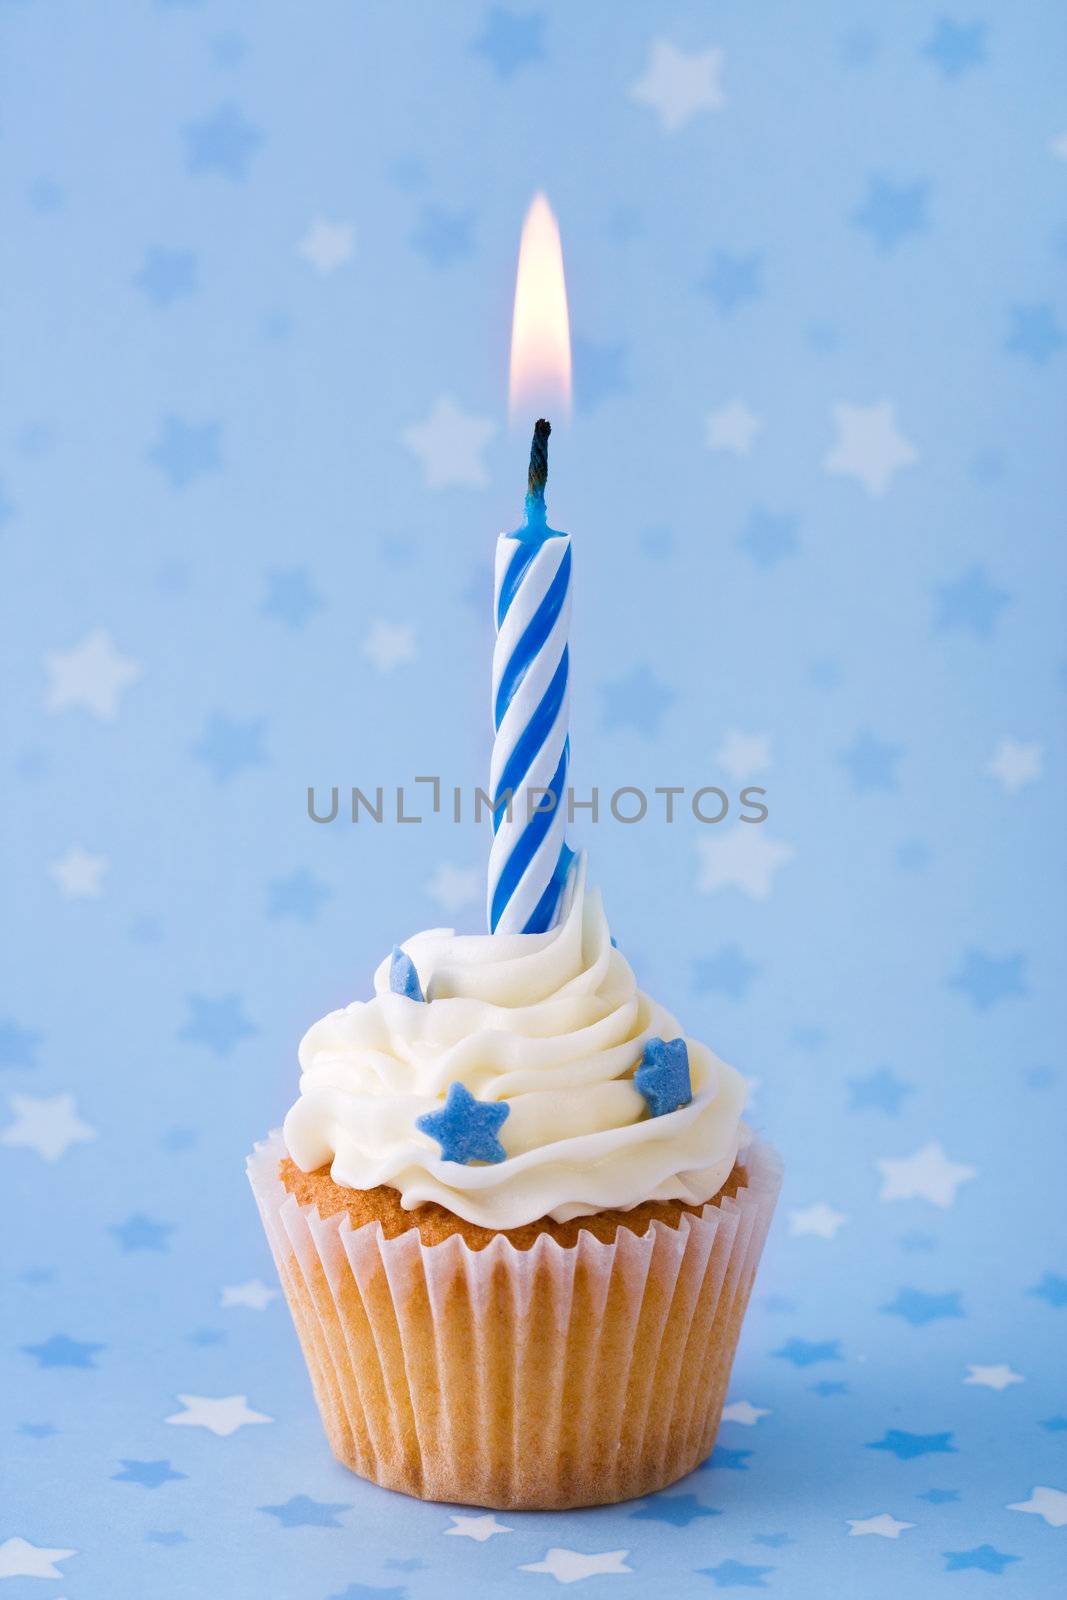 Mini birthday cupcake against a blue starry background